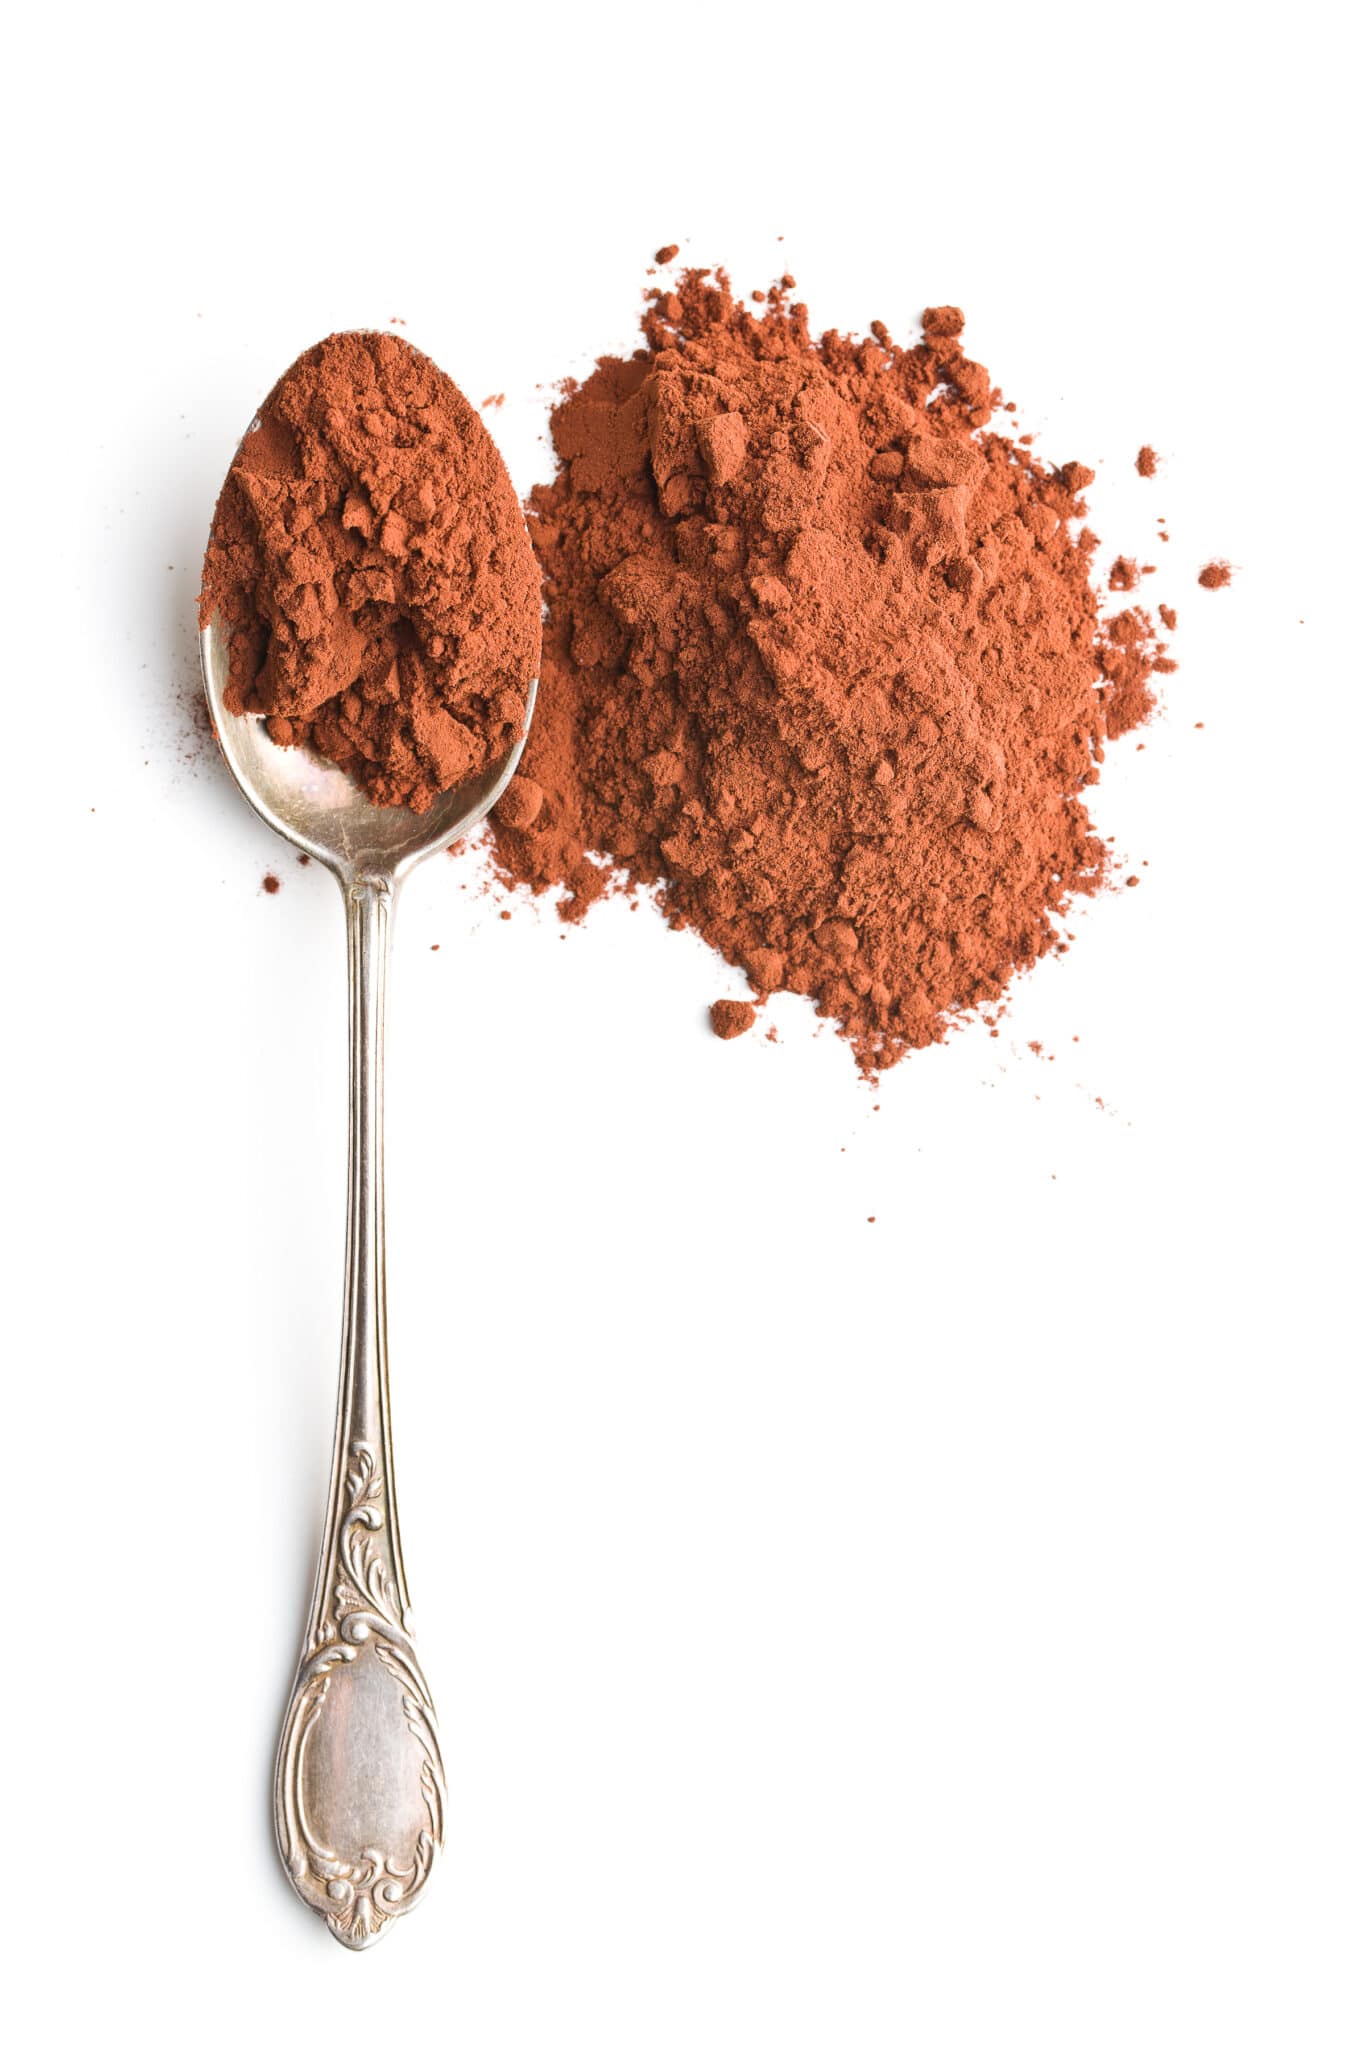 A spoon next to a small pile of cocoa powder.